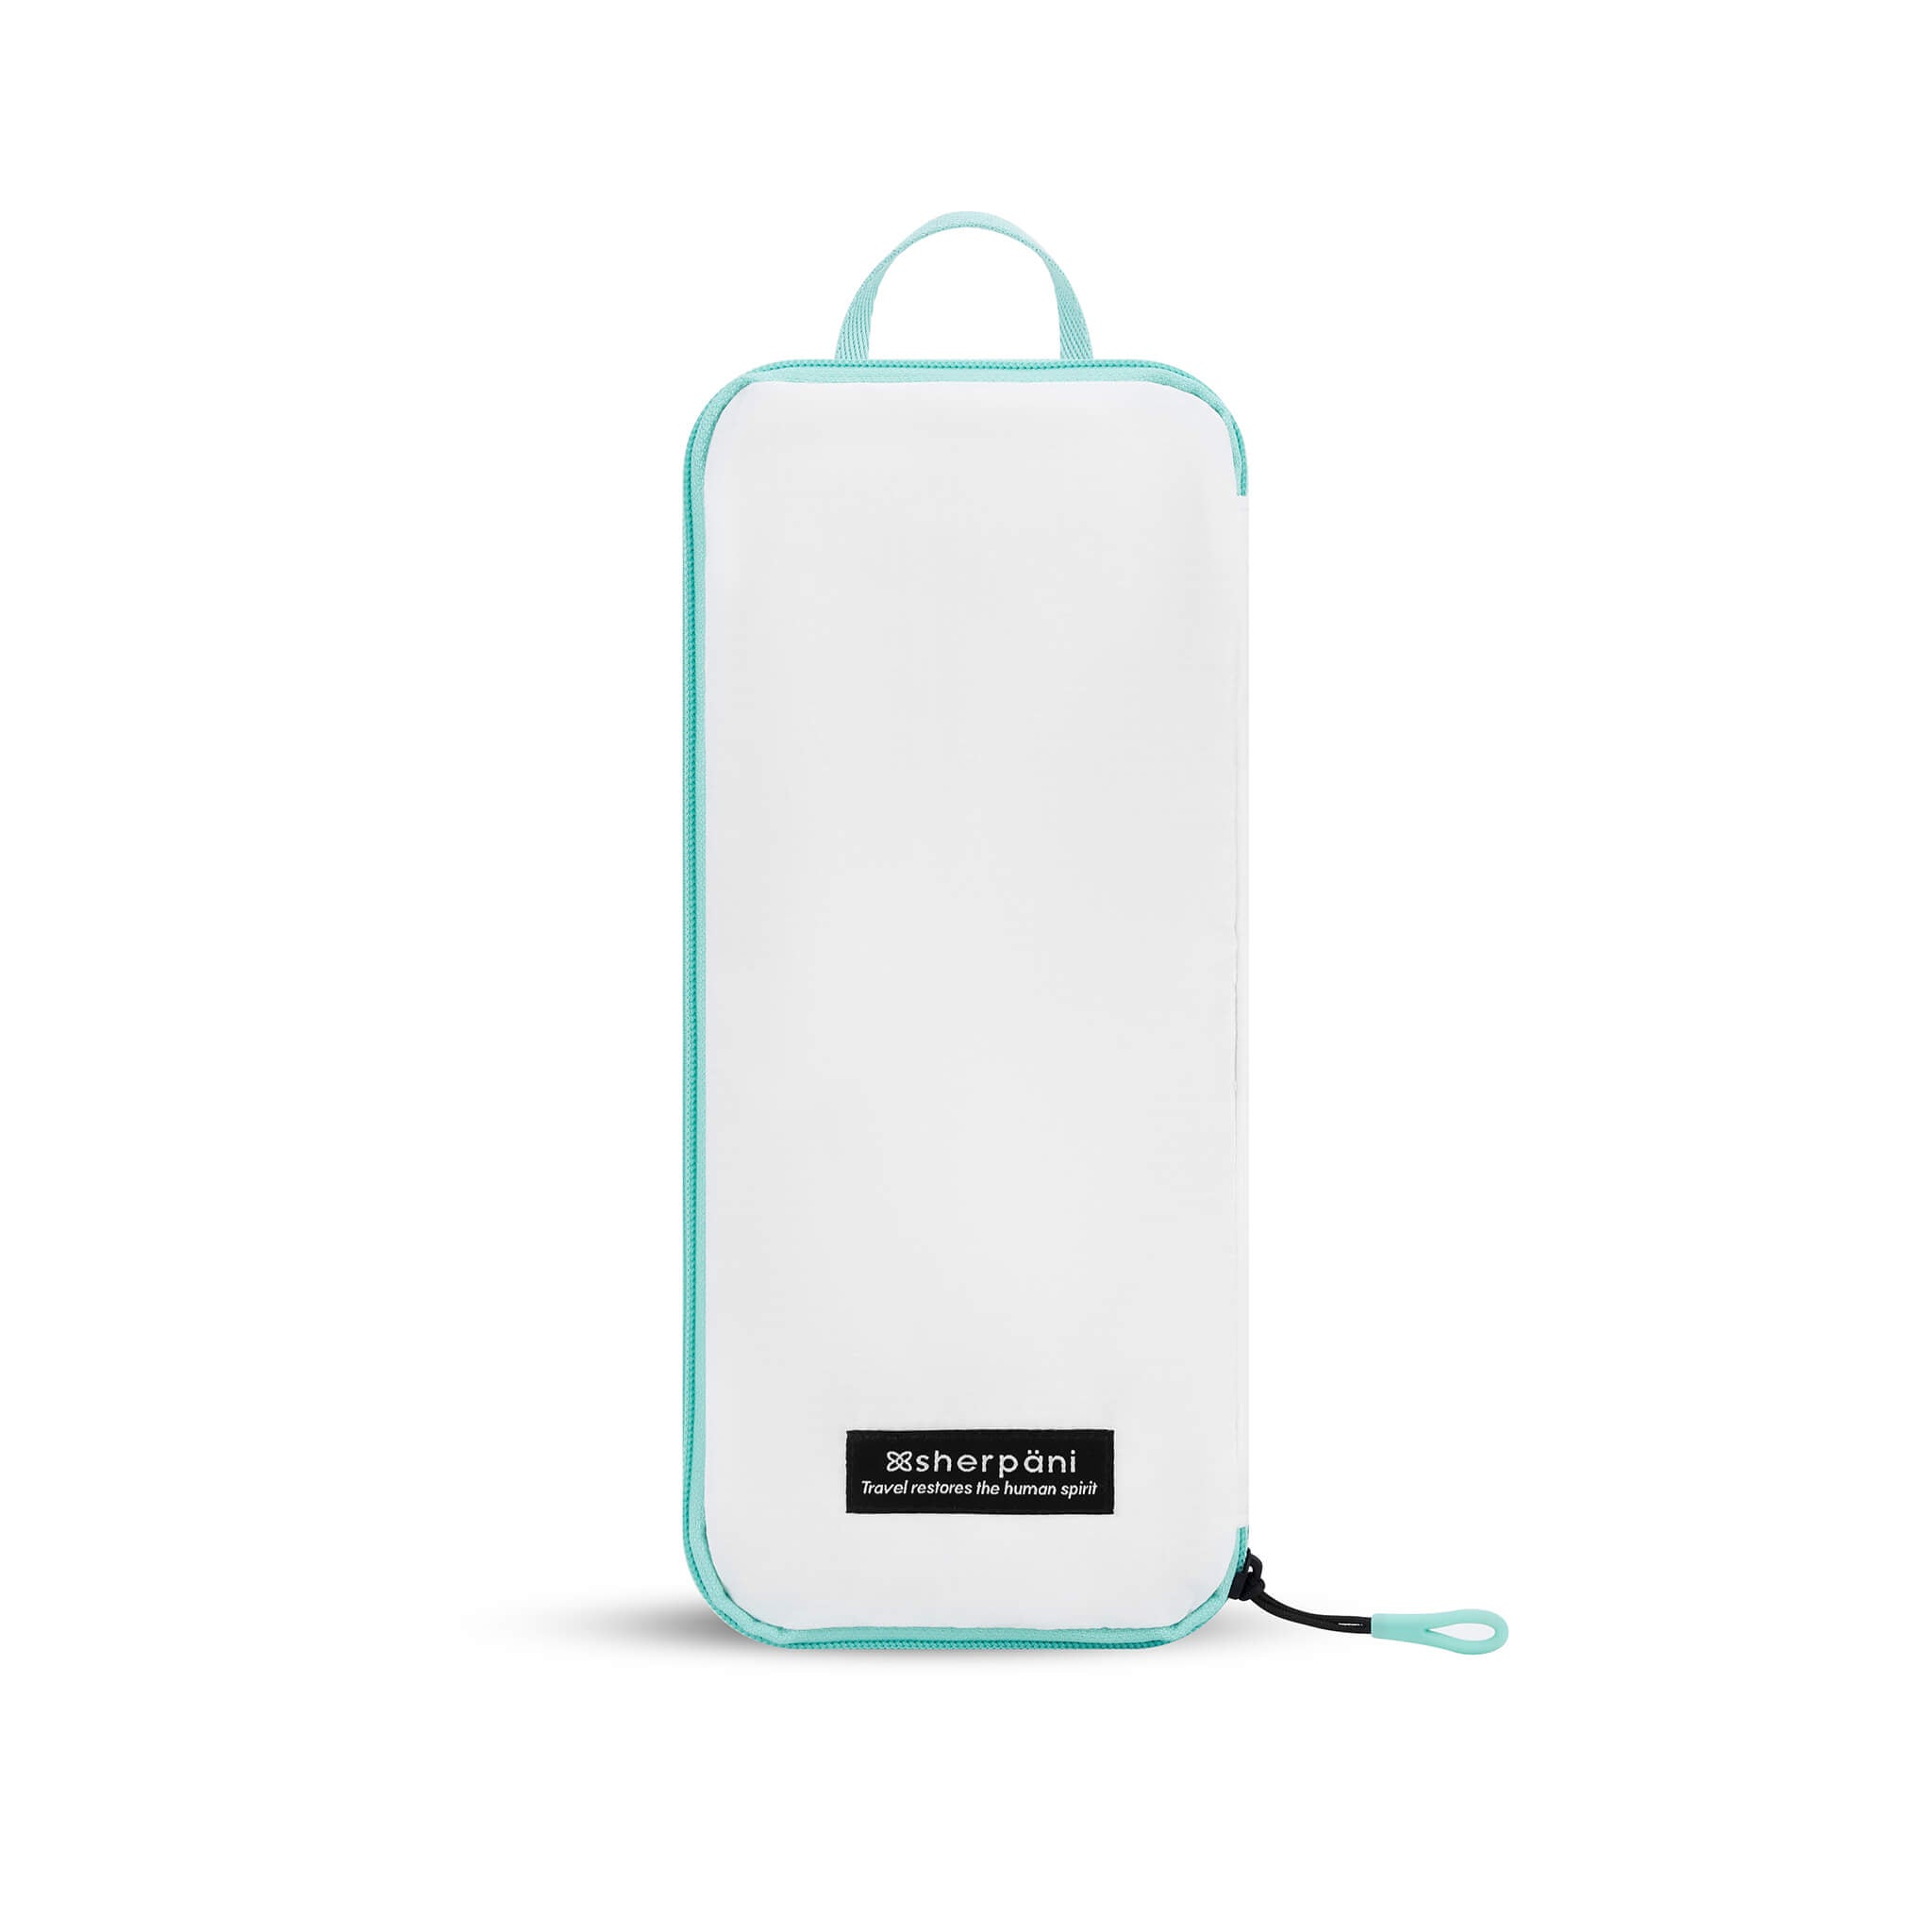 Flat front view of Compass Packing Cube in small size. The cube is white with zipper and handle accented in aqua. 